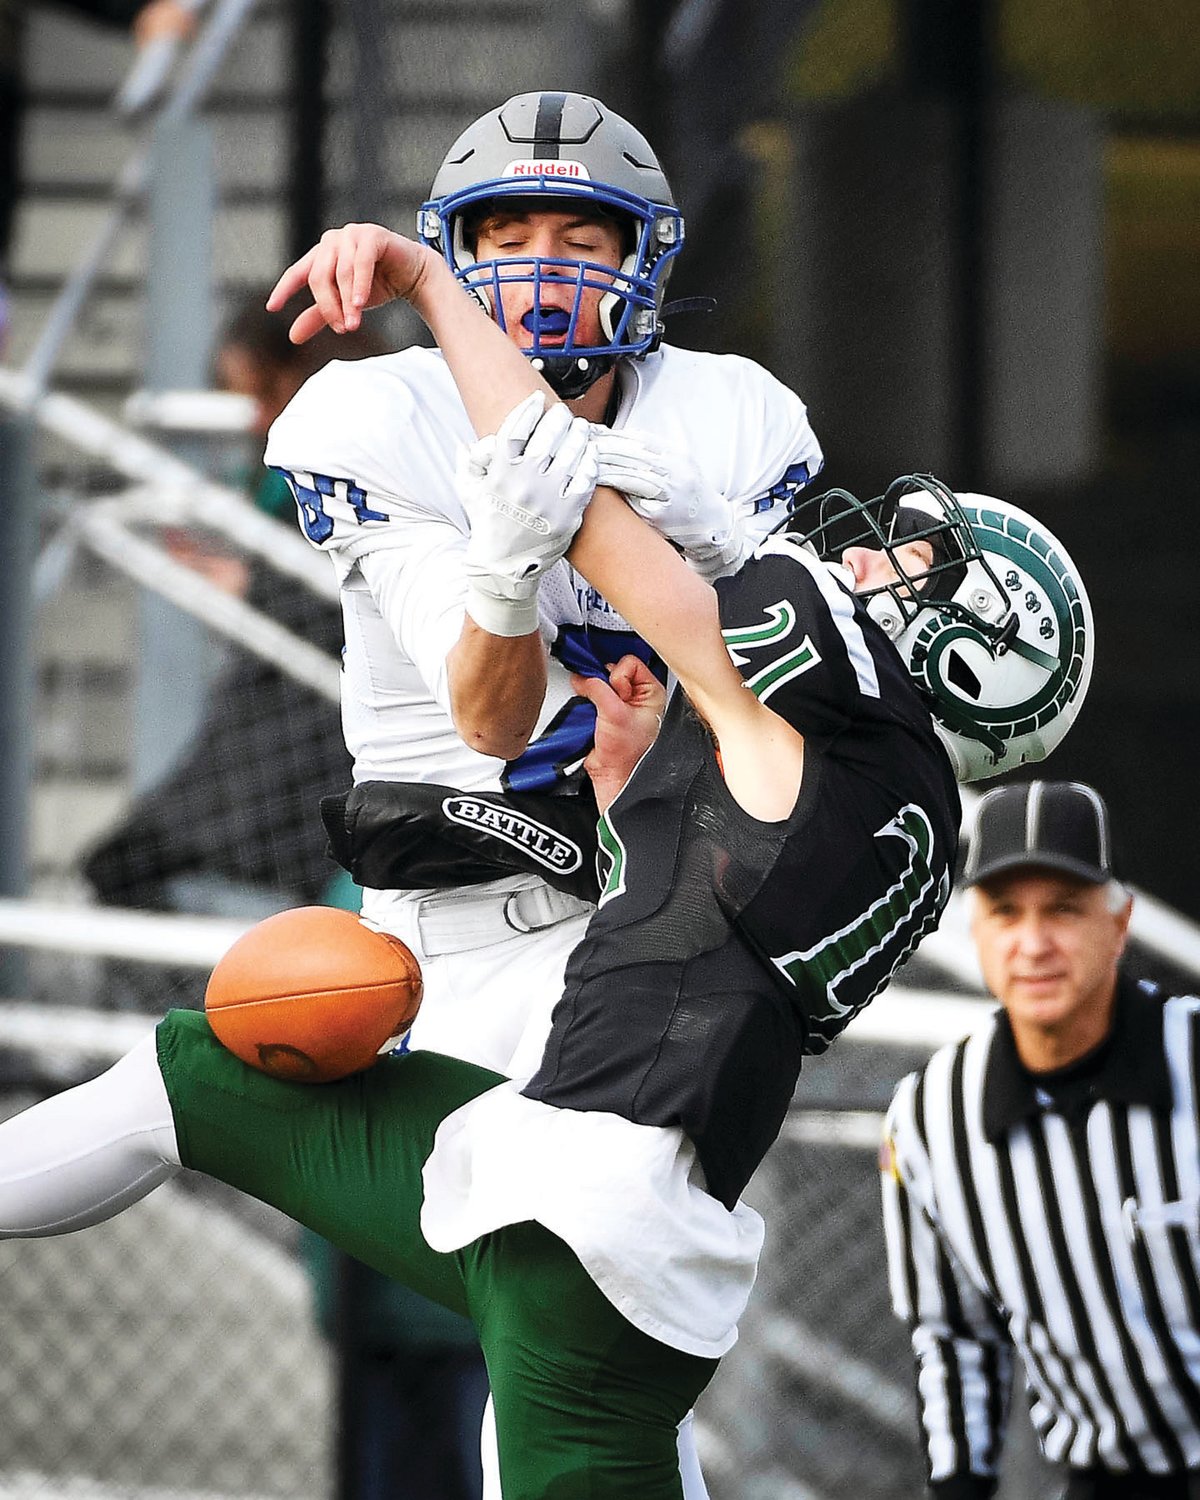 Pennridge’s Connor Lelii breaks up a pass intended for Quakertown’s Zach Fondl.